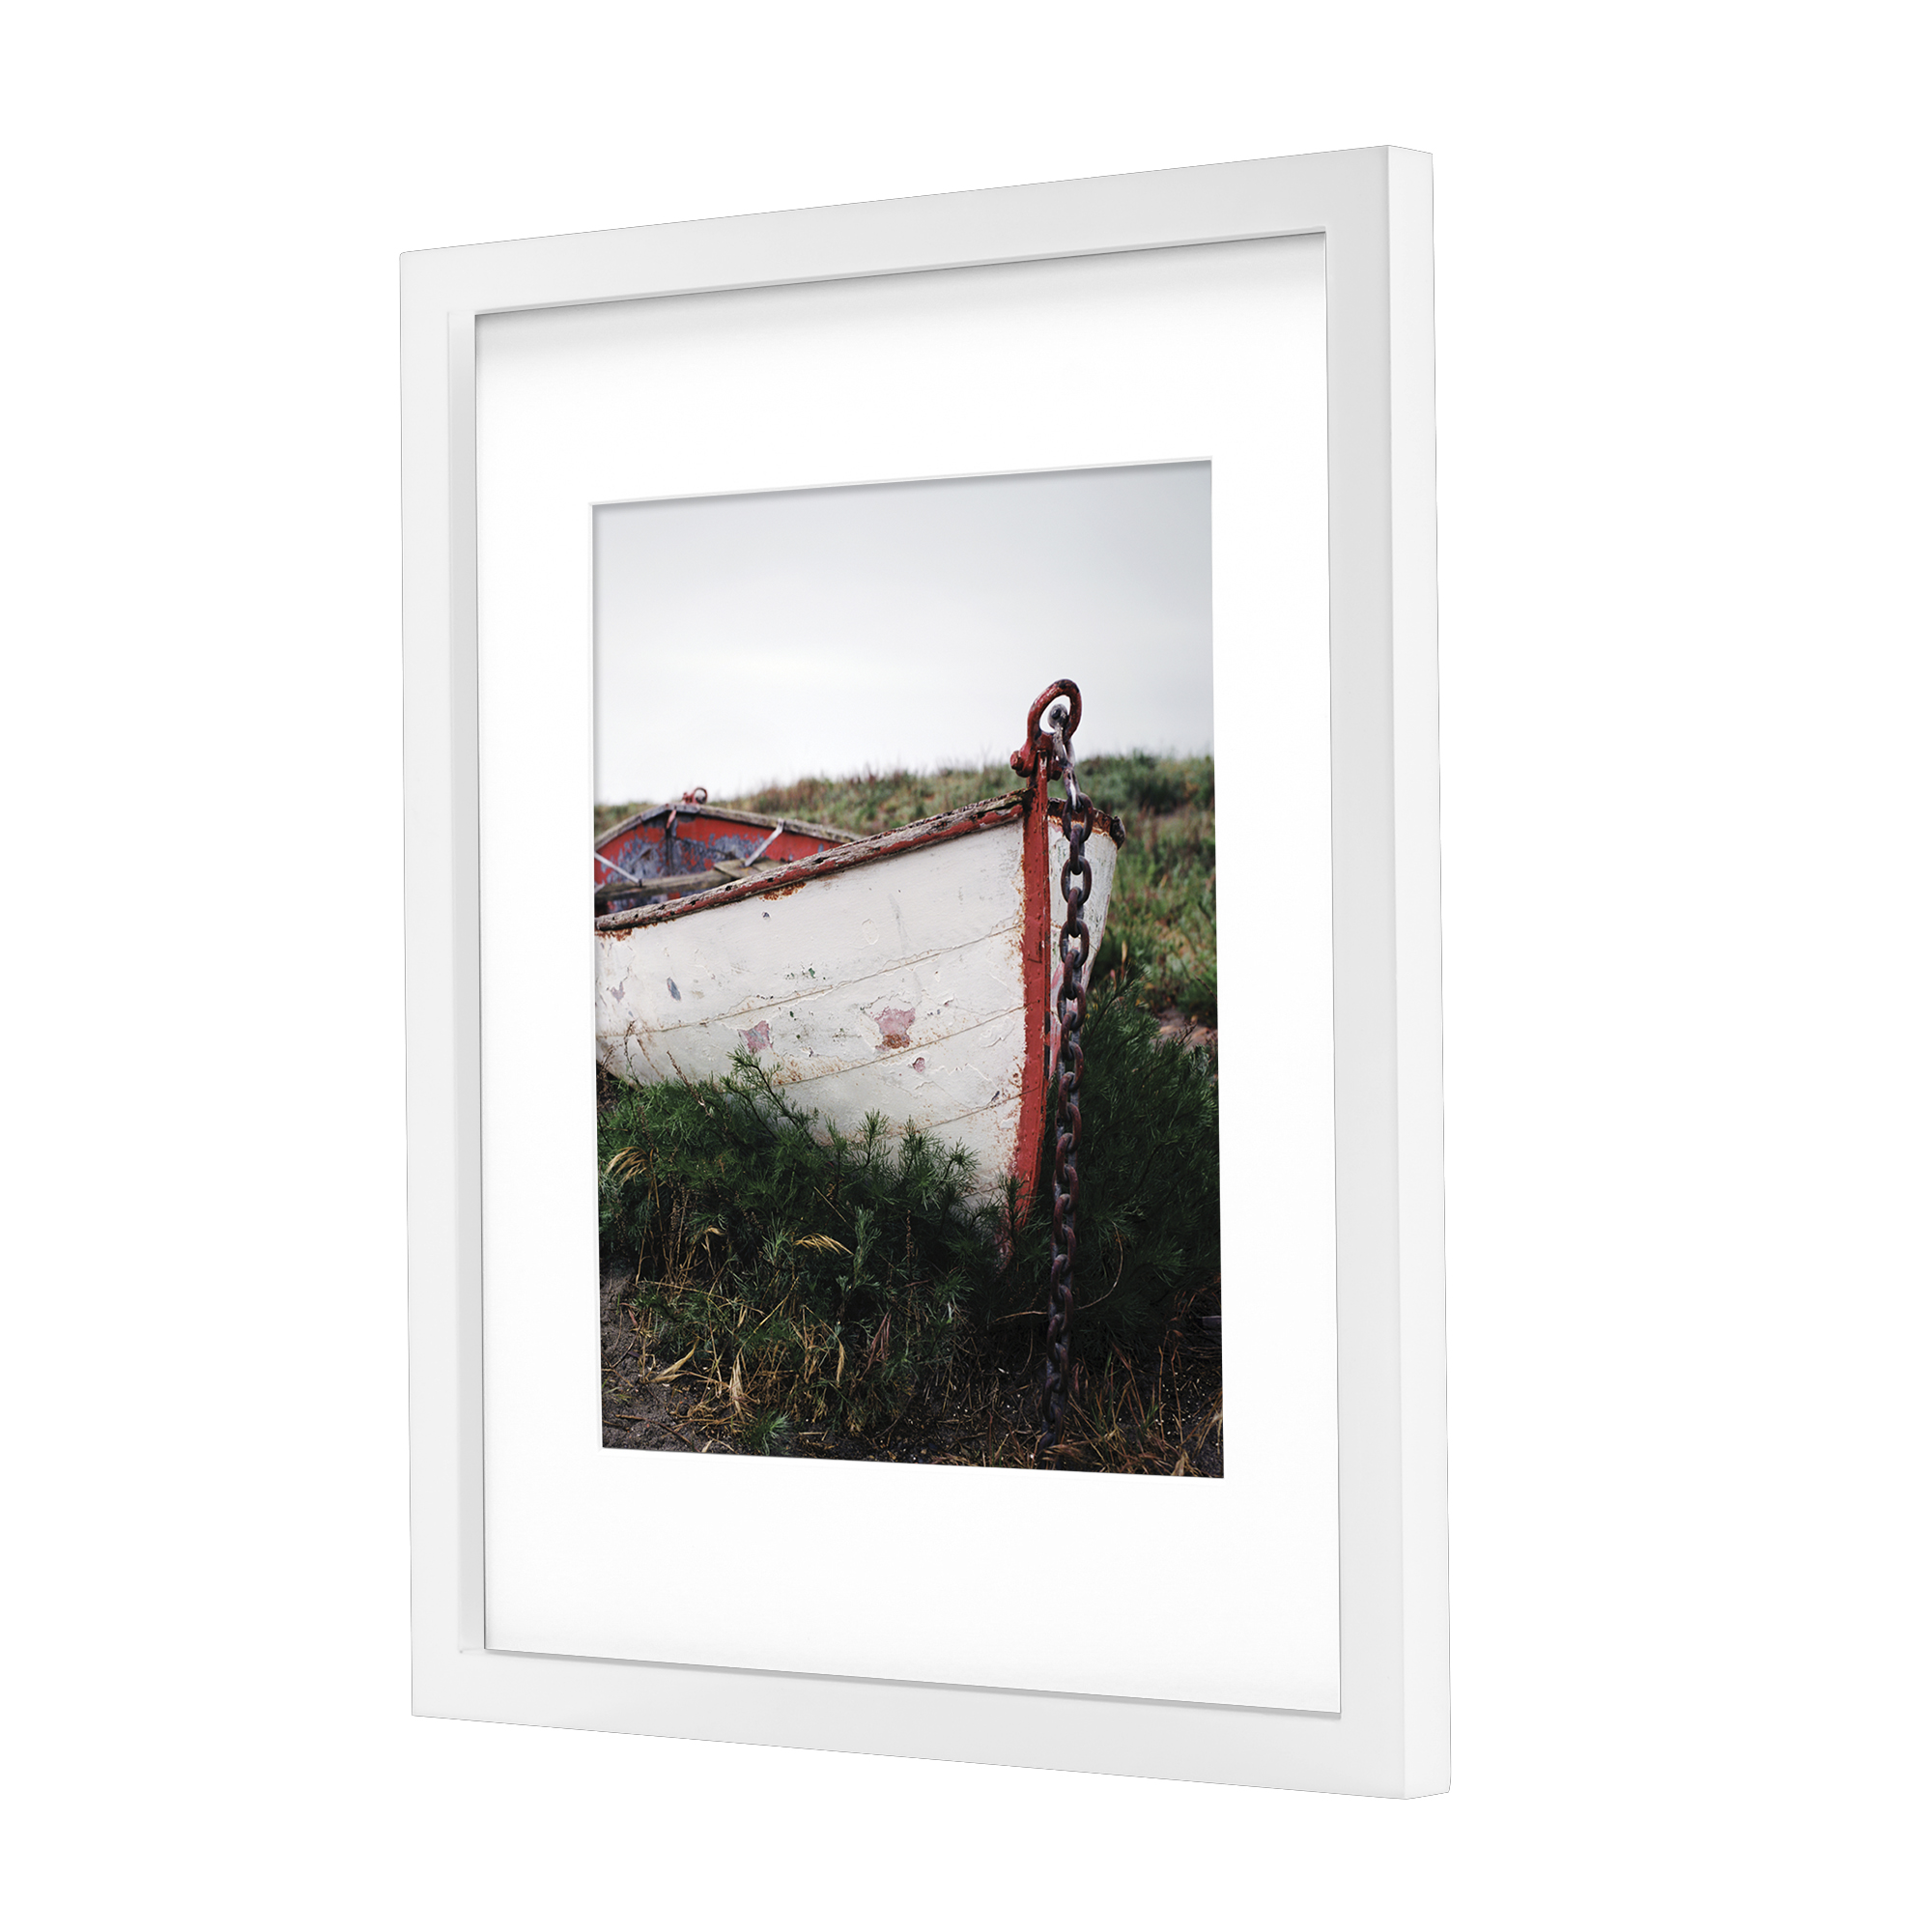 Better Homes & Gardens Gallery 11" x 14" Without Mat for 8" x 10", Wall Picture Frame, White - image 5 of 5